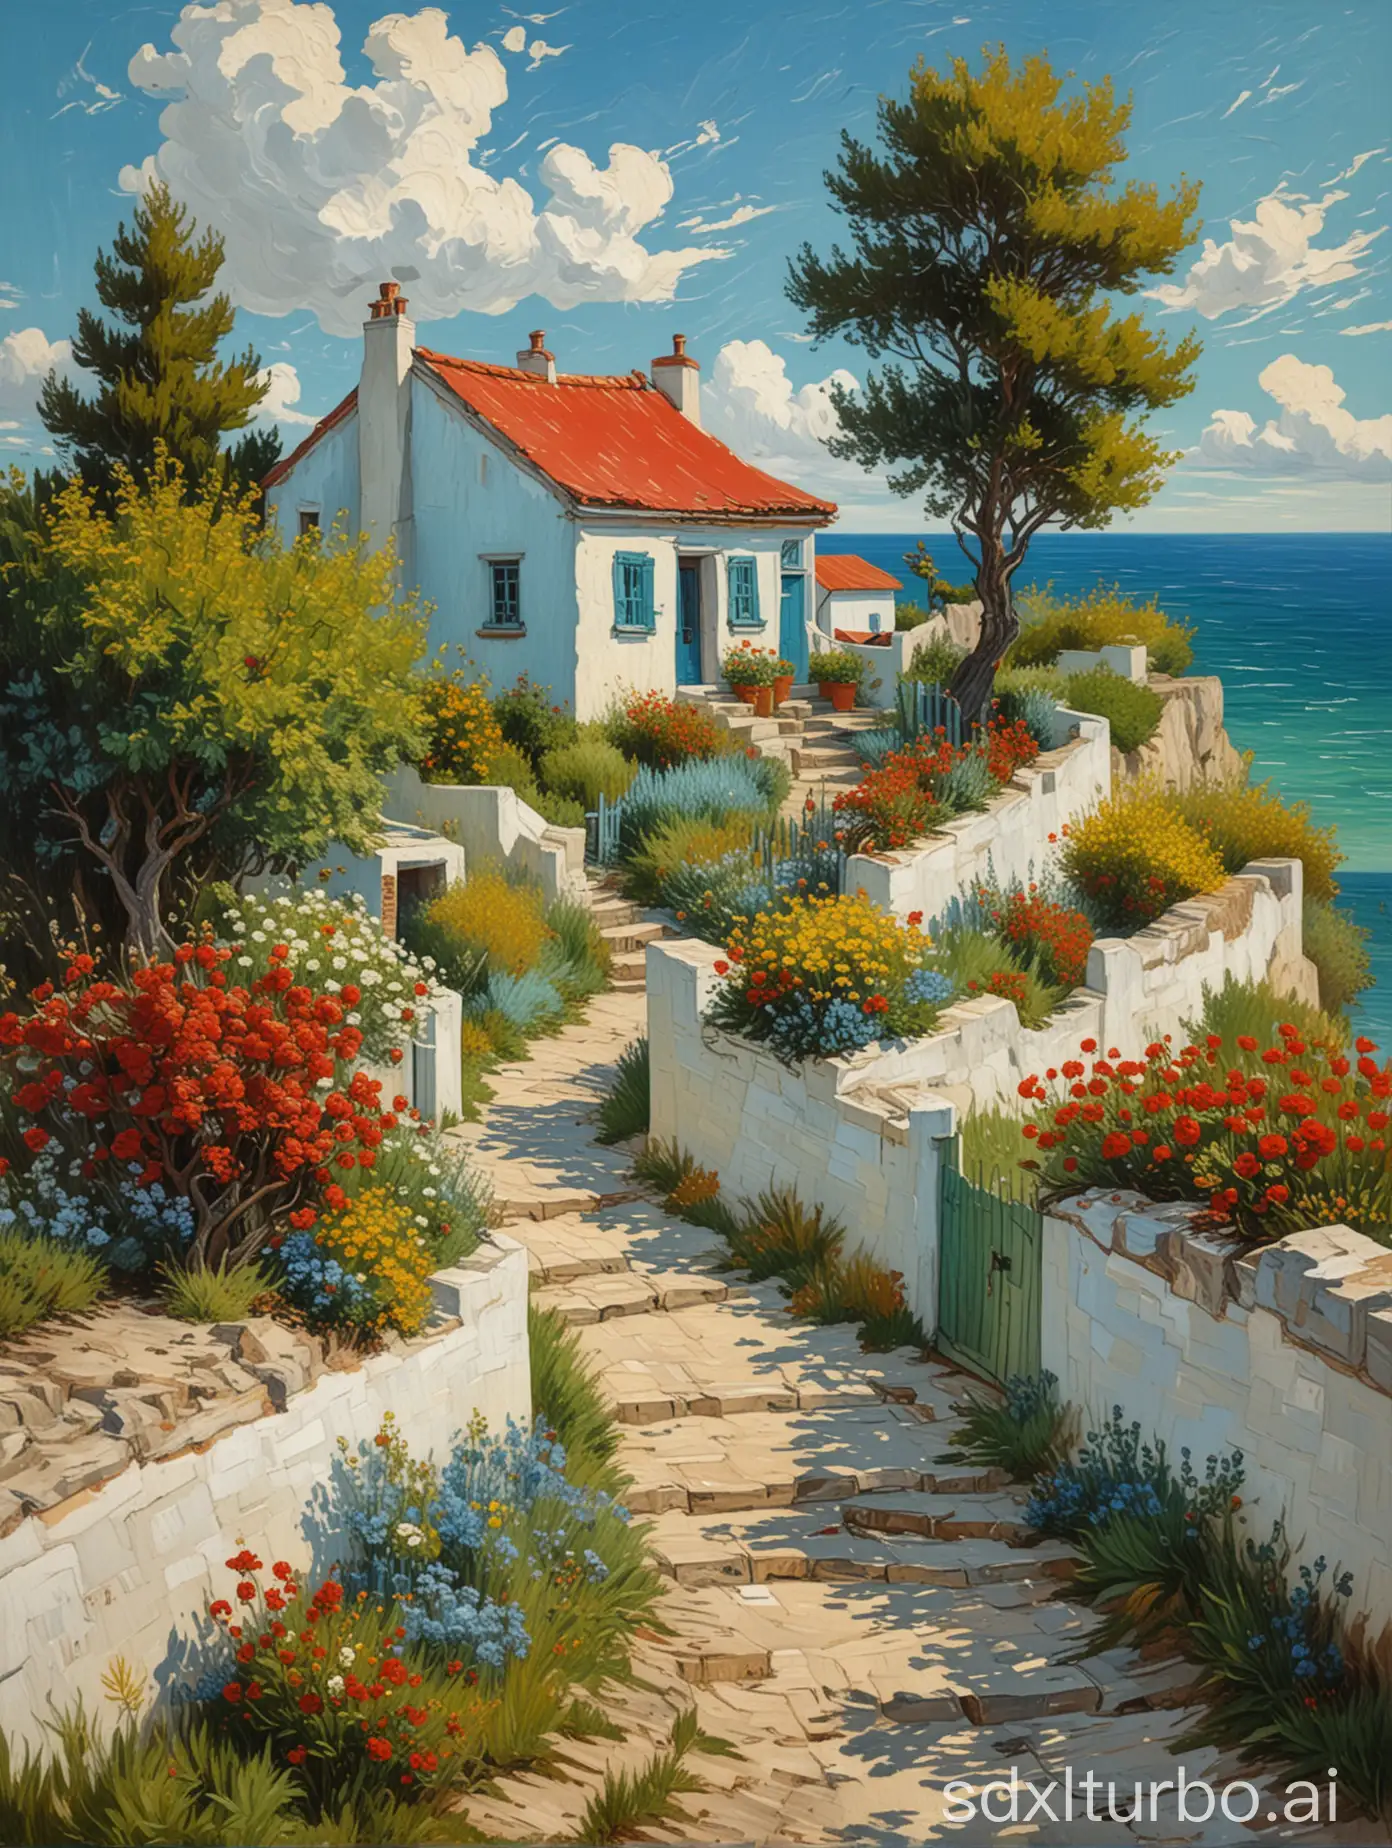 a post impressionist oil painting, van gogh, a painting of a house on a cliff by the seaside, with a red roof and white walls, several trees next to the house, a path leading to the door full of flowers, a white cloud oil painting on the blue sky,